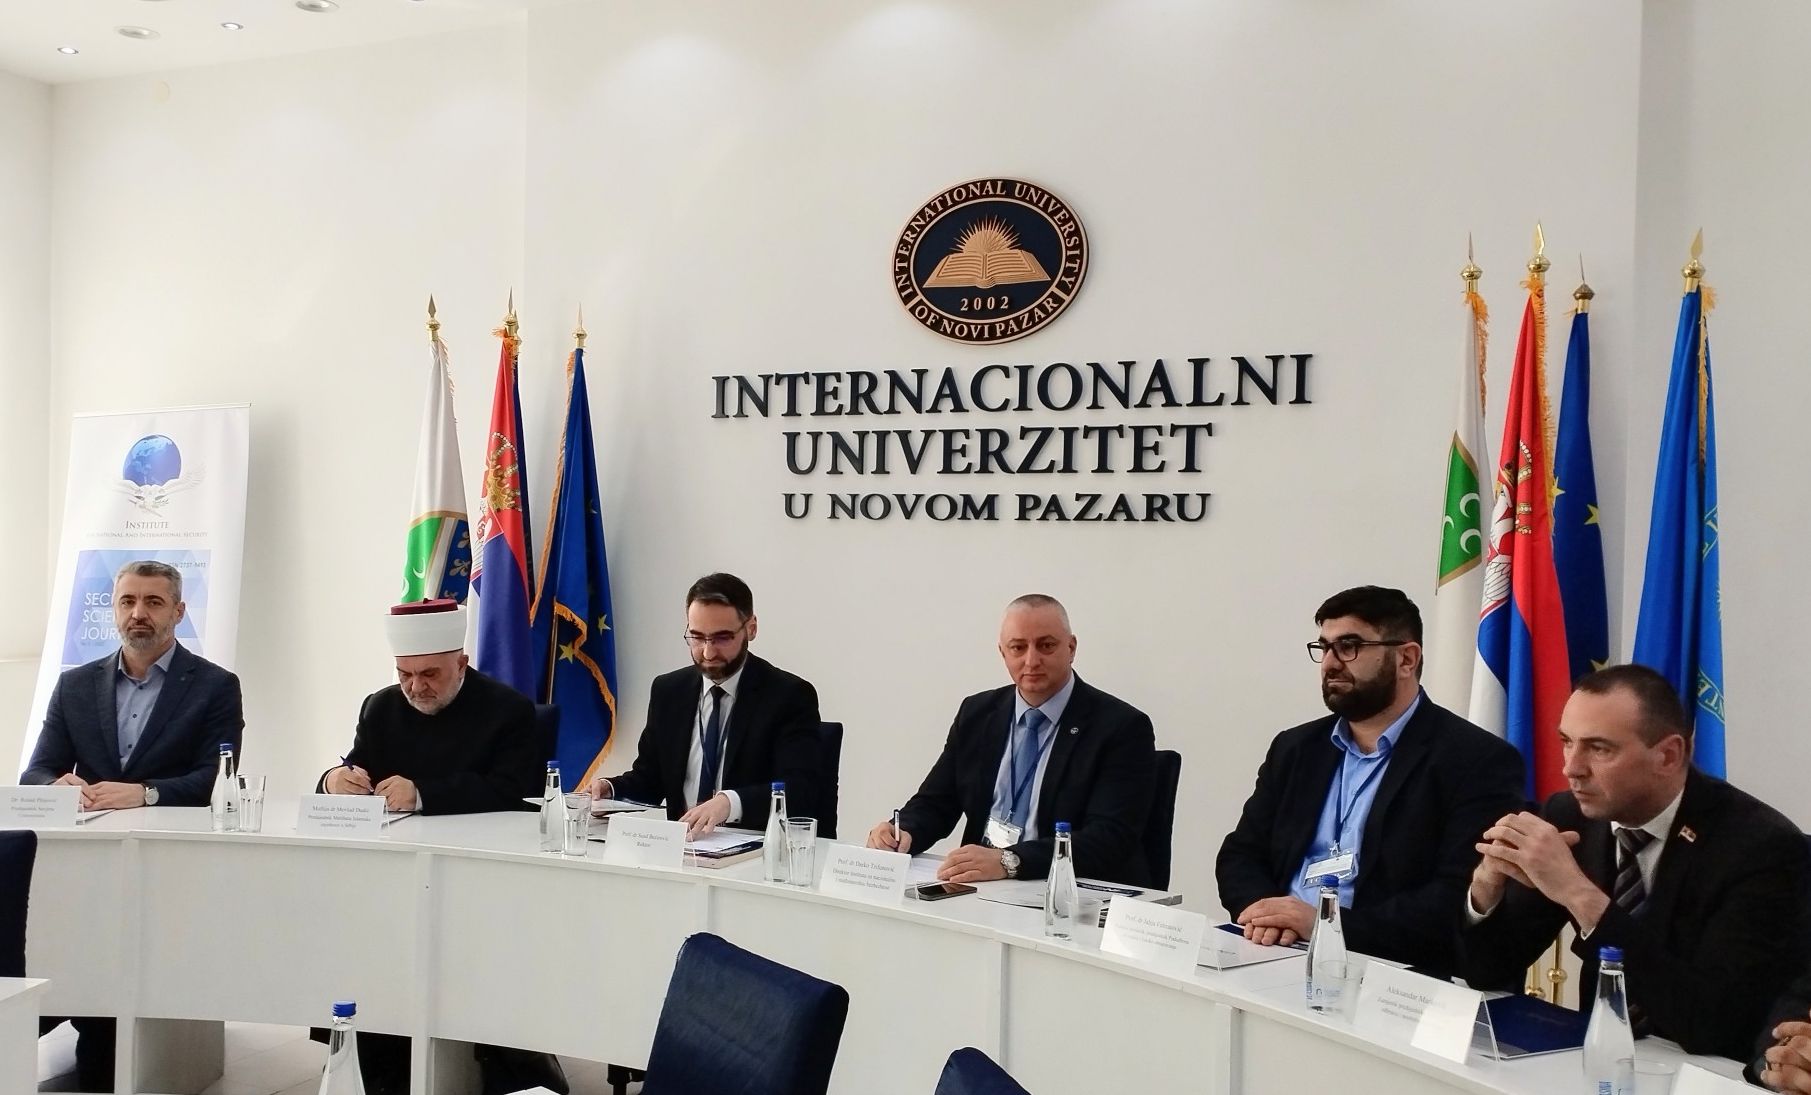 Intercultural understanding – a factor of peace and stability in the Western Balkans